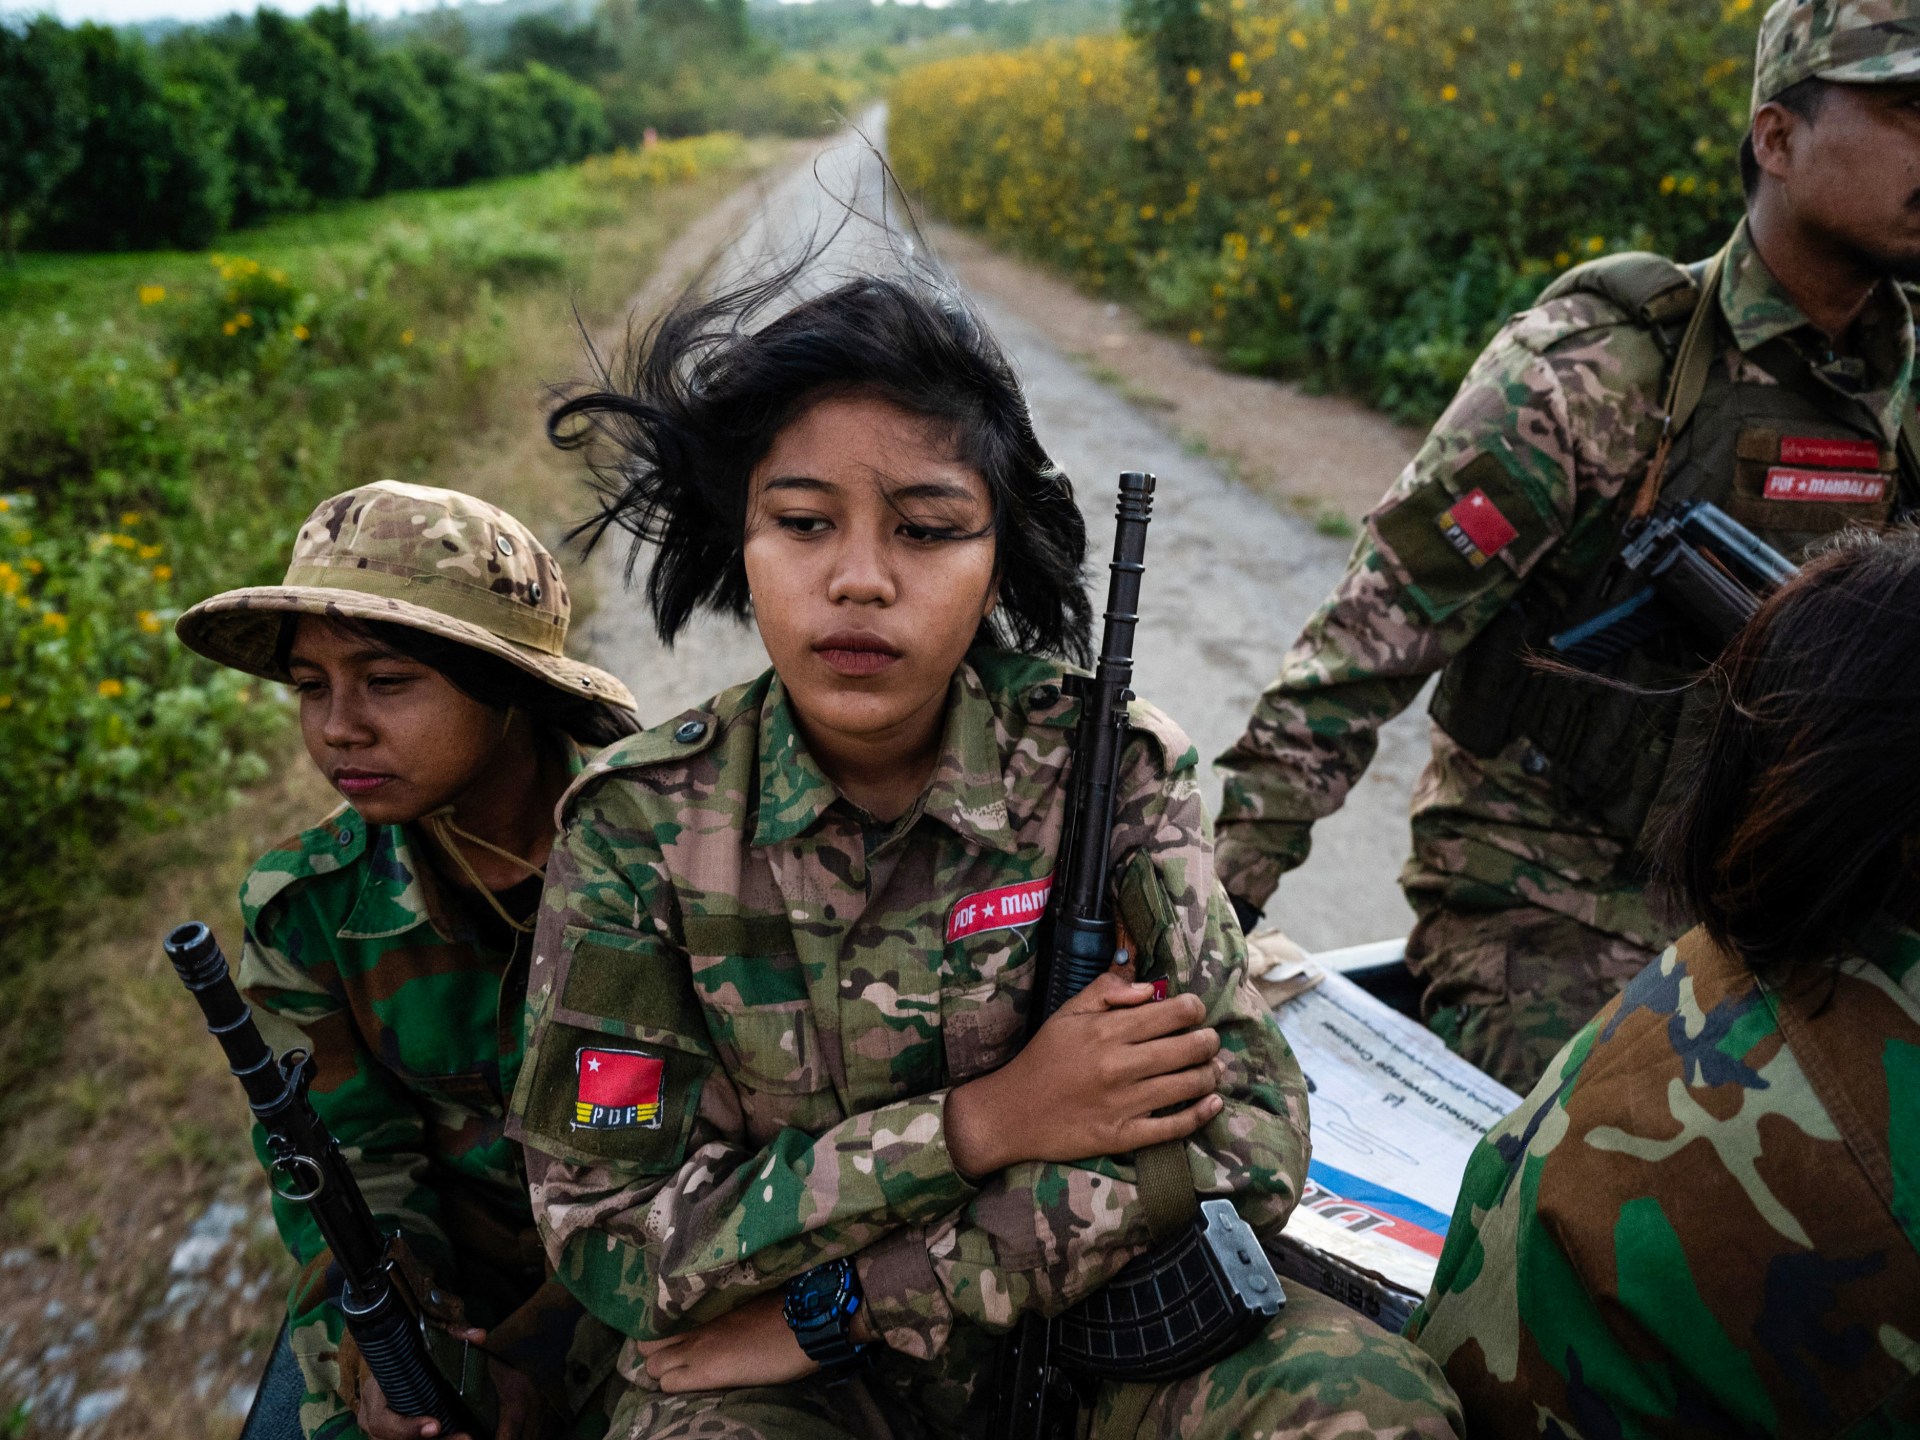 ‘Blood and sweat’: Myanmar resistance fights to overturn military coup | Conflict News